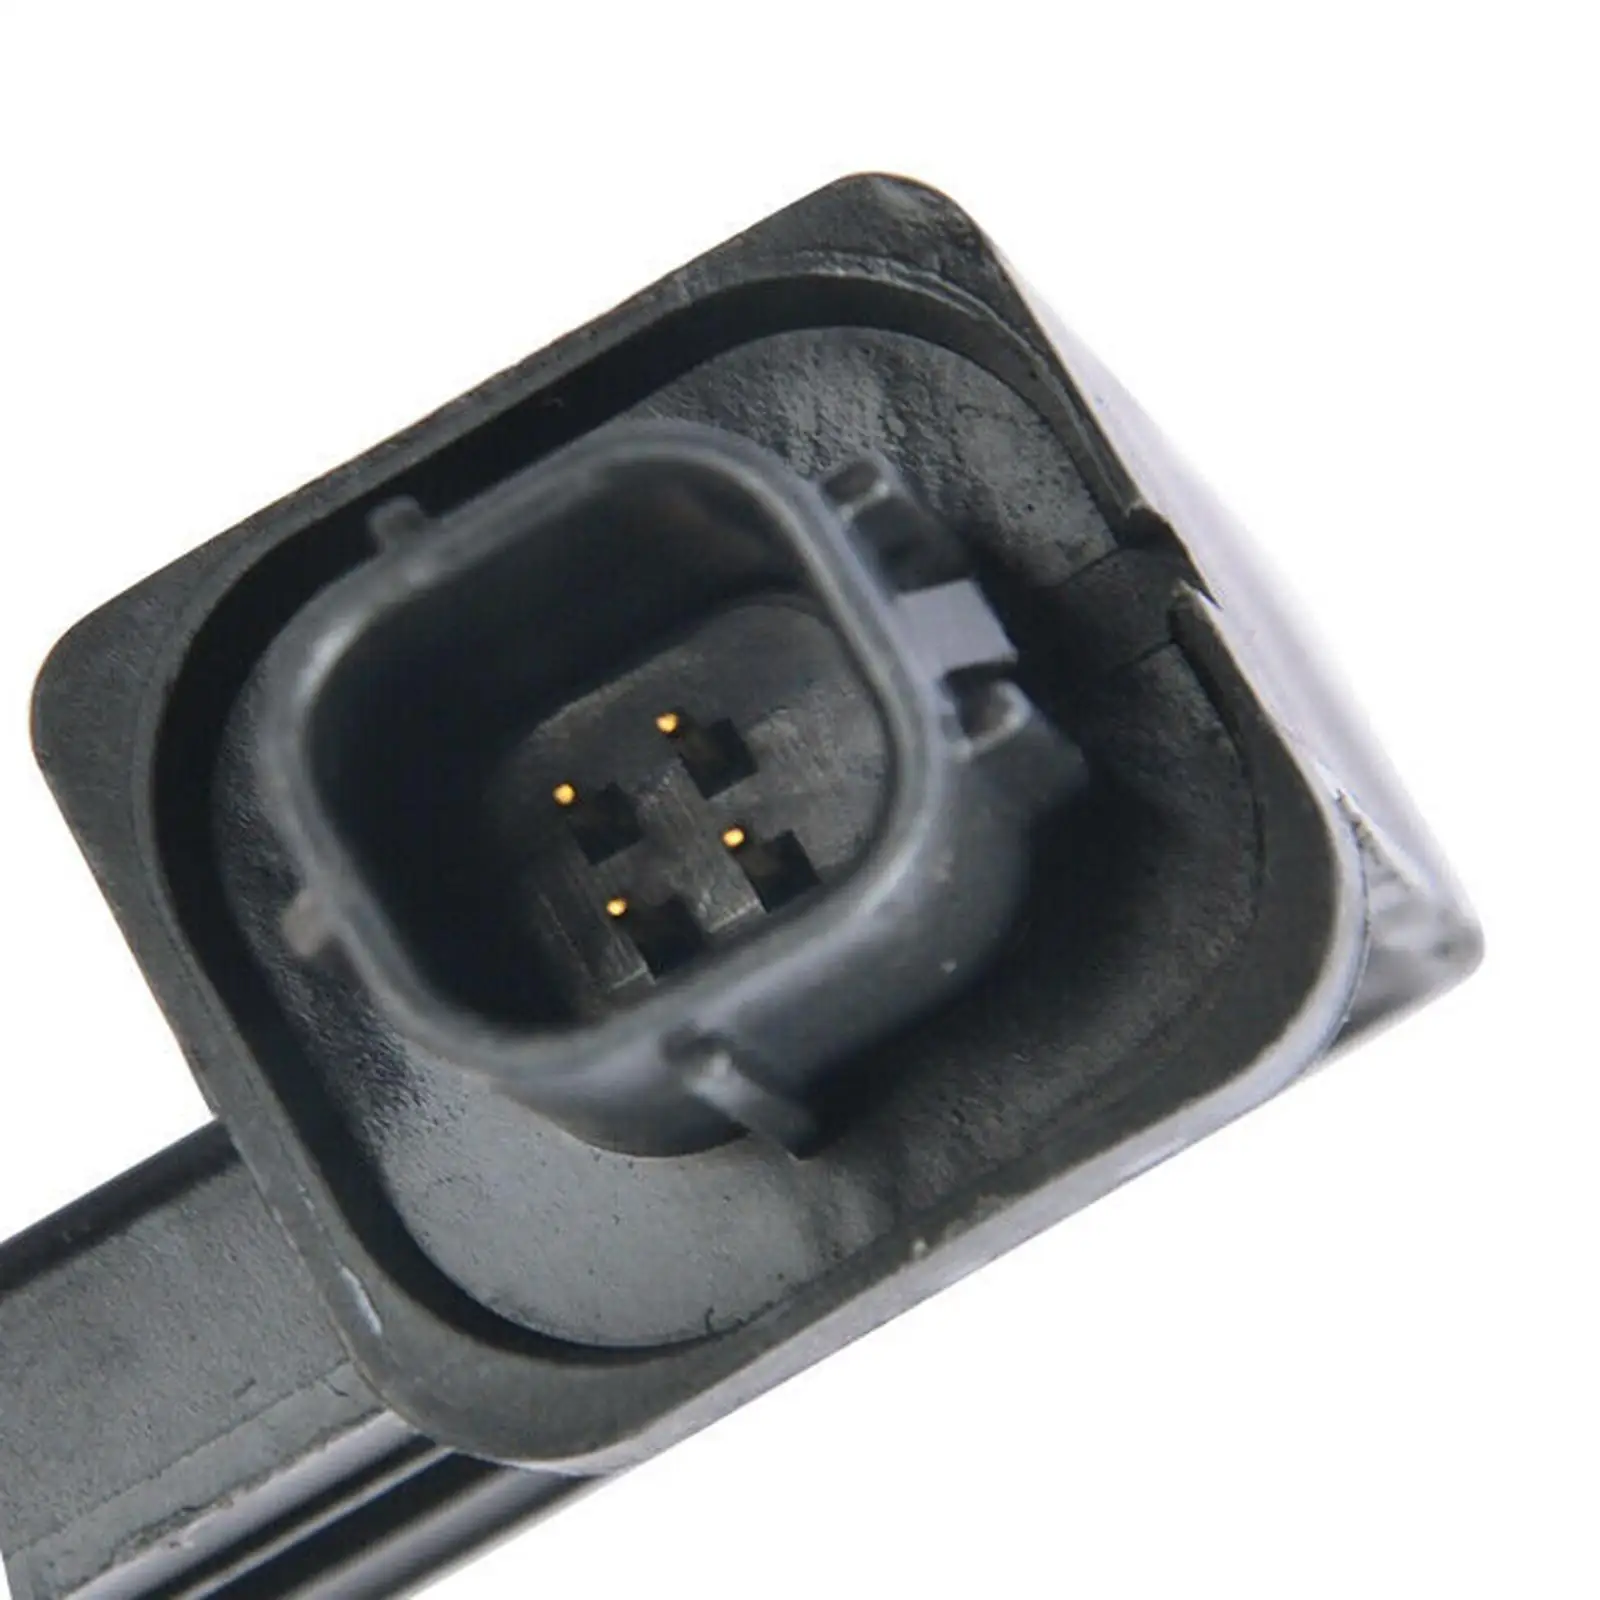 Battery Current Sensor, 294G0-1HH0A 14-2019, Parts Replace Easy to Install Accessories